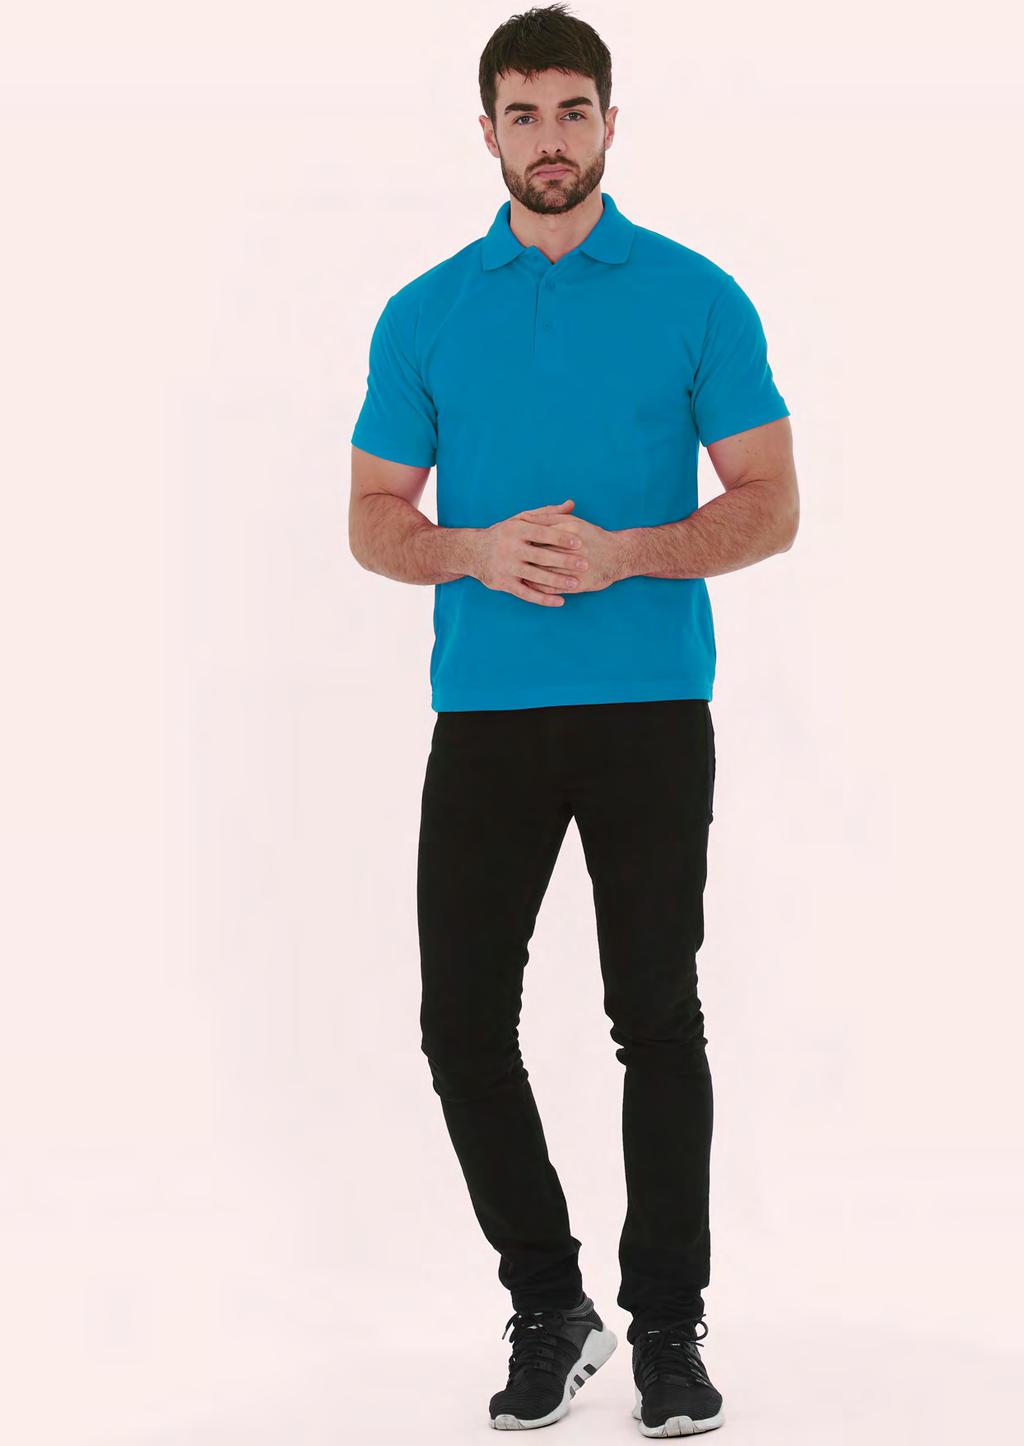 POLOSHIRTS UC114 MENS ULTRA POLOSHIRT NEW 180 40 60/10 100% Pre-Shrunk Ringspun Combed Cotton Reactive Dyed Knitted Collar and Cuff Taped Neck Twin Needle Stitching on Hem Washable at 40 Degrees 3